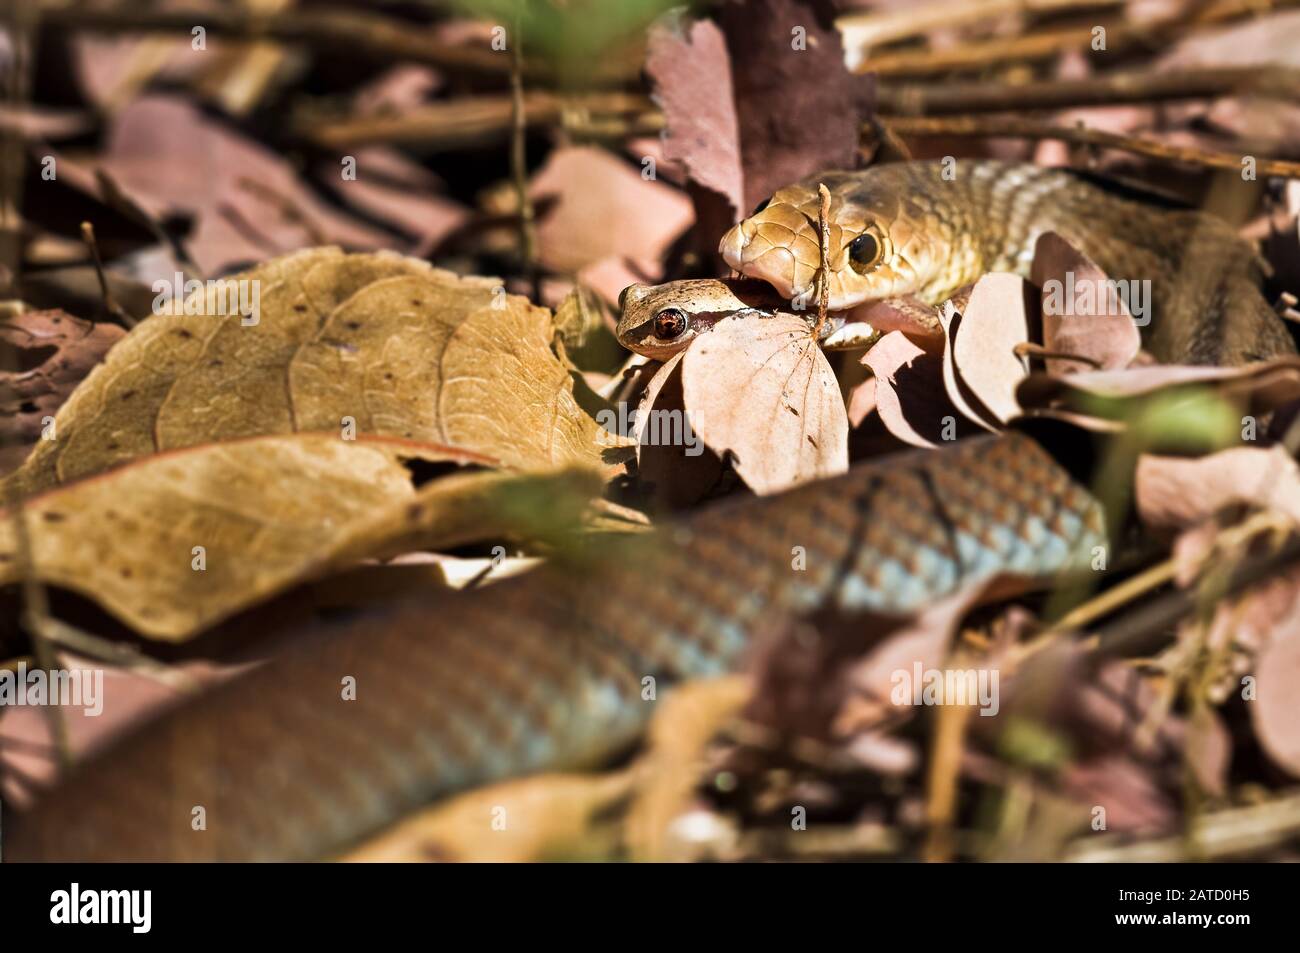 Young, but deadl king brown or mulga snake feeding on a tree frog in the leaf litter habitat of the Gulf Country of Far North Queensland in Australia. Stock Photo